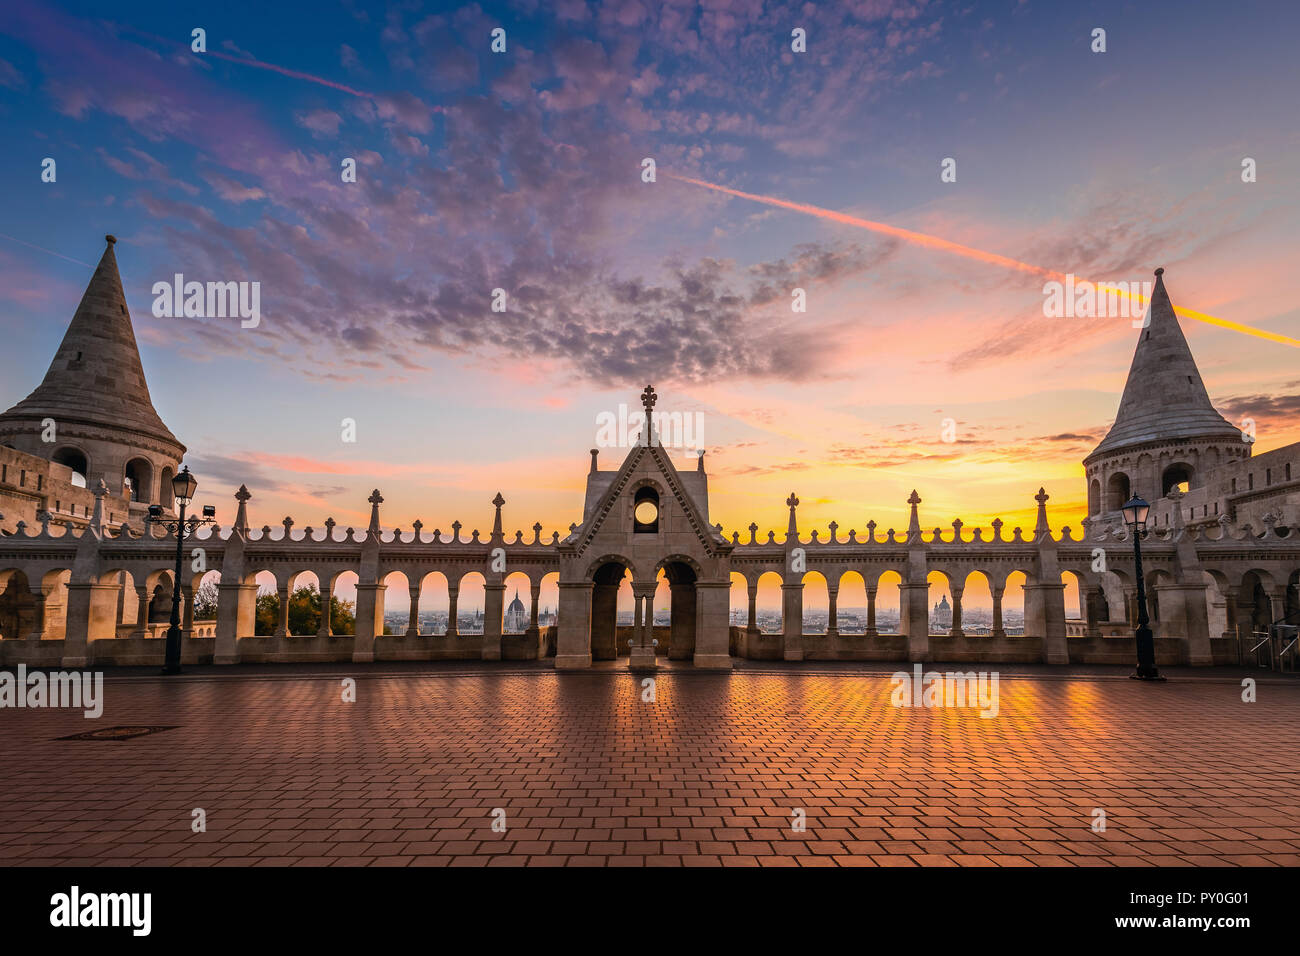 Budapest, Hungary - Beautiful golden sunrise at Fisherman's Bastion with Parliament of Hungary and St. Stephen's Basilica at background with colourful Stock Photo